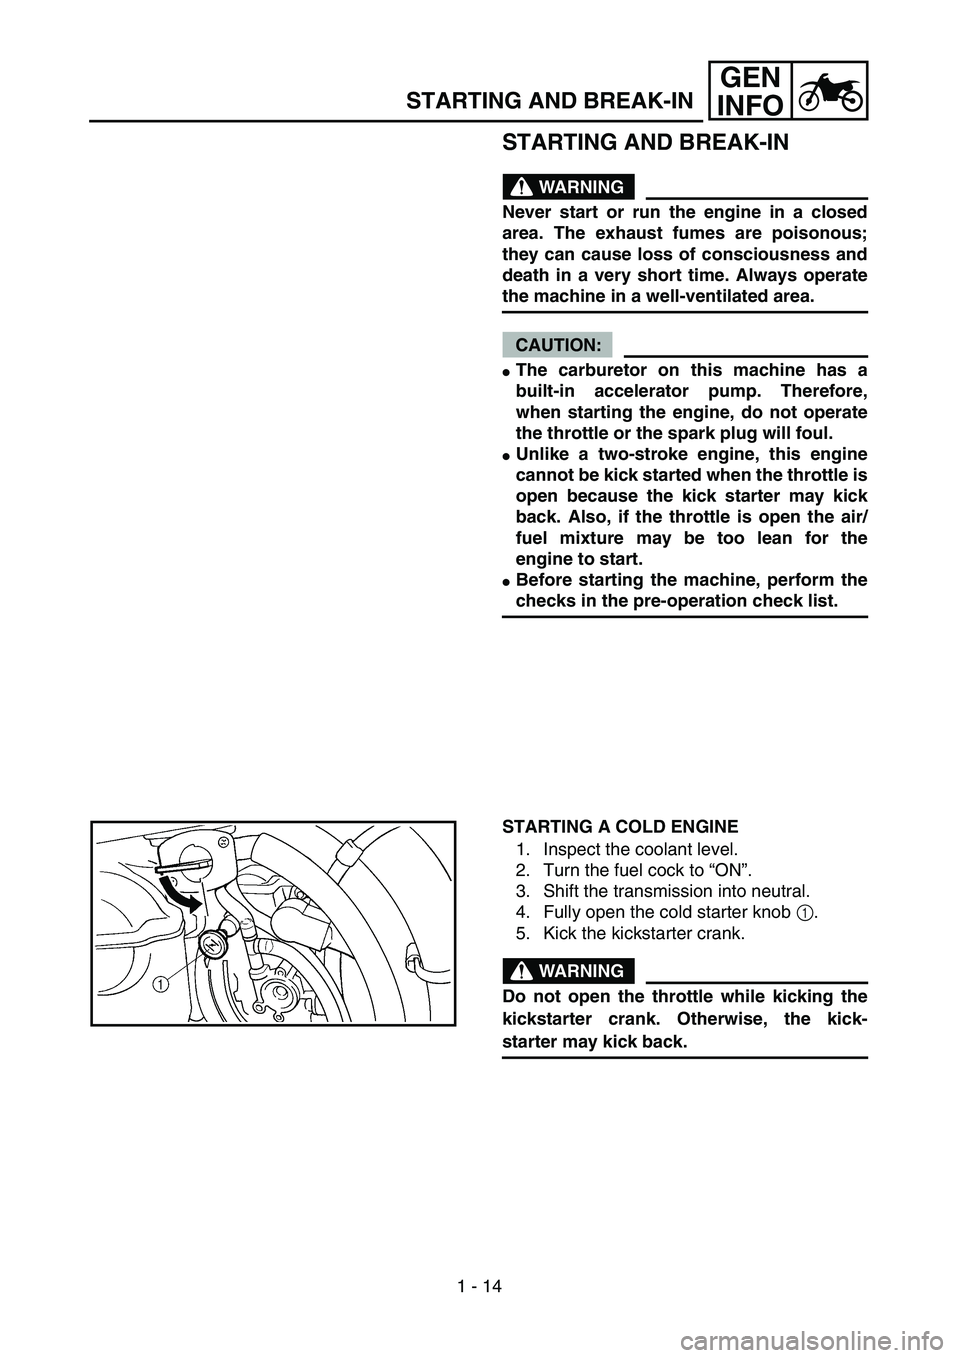 YAMAHA YZ250F 2004  Owners Manual  
1 - 14
GEN
INFO
 
STARTING AND BREAK-IN
WARNING
 
Never start or run the engine in a closed
area. The exhaust fumes are poisonous;
they can cause loss of consciousness and
death in a very short time